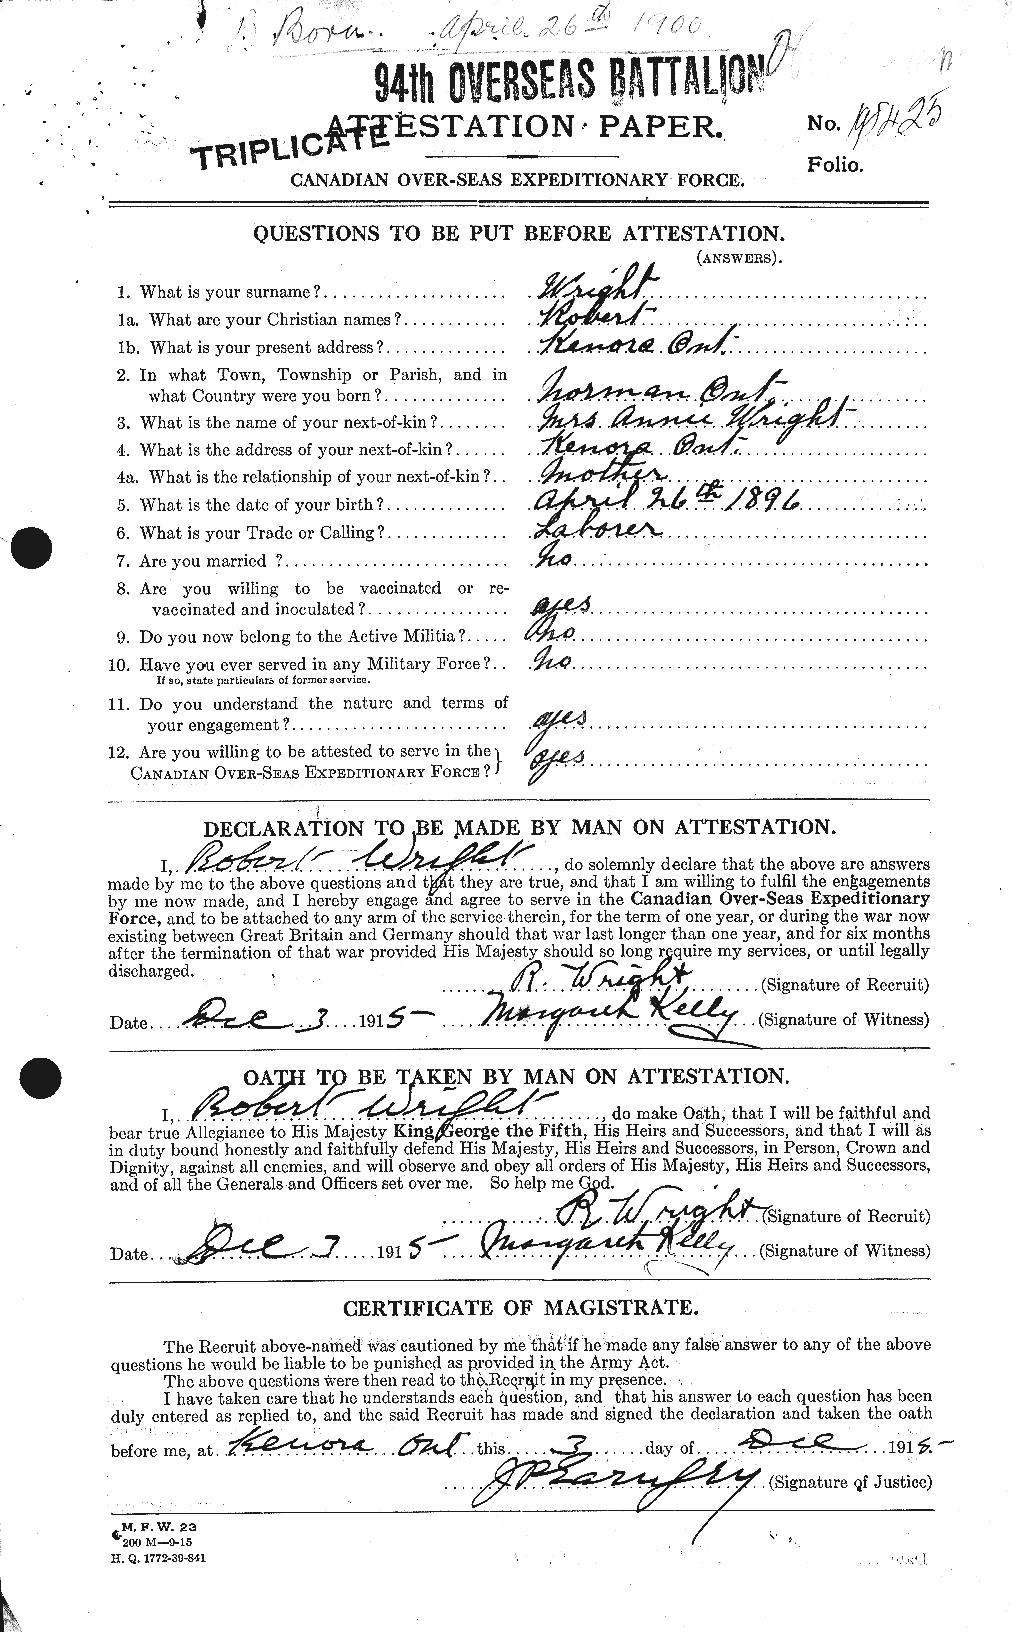 Personnel Records of the First World War - CEF 688497a